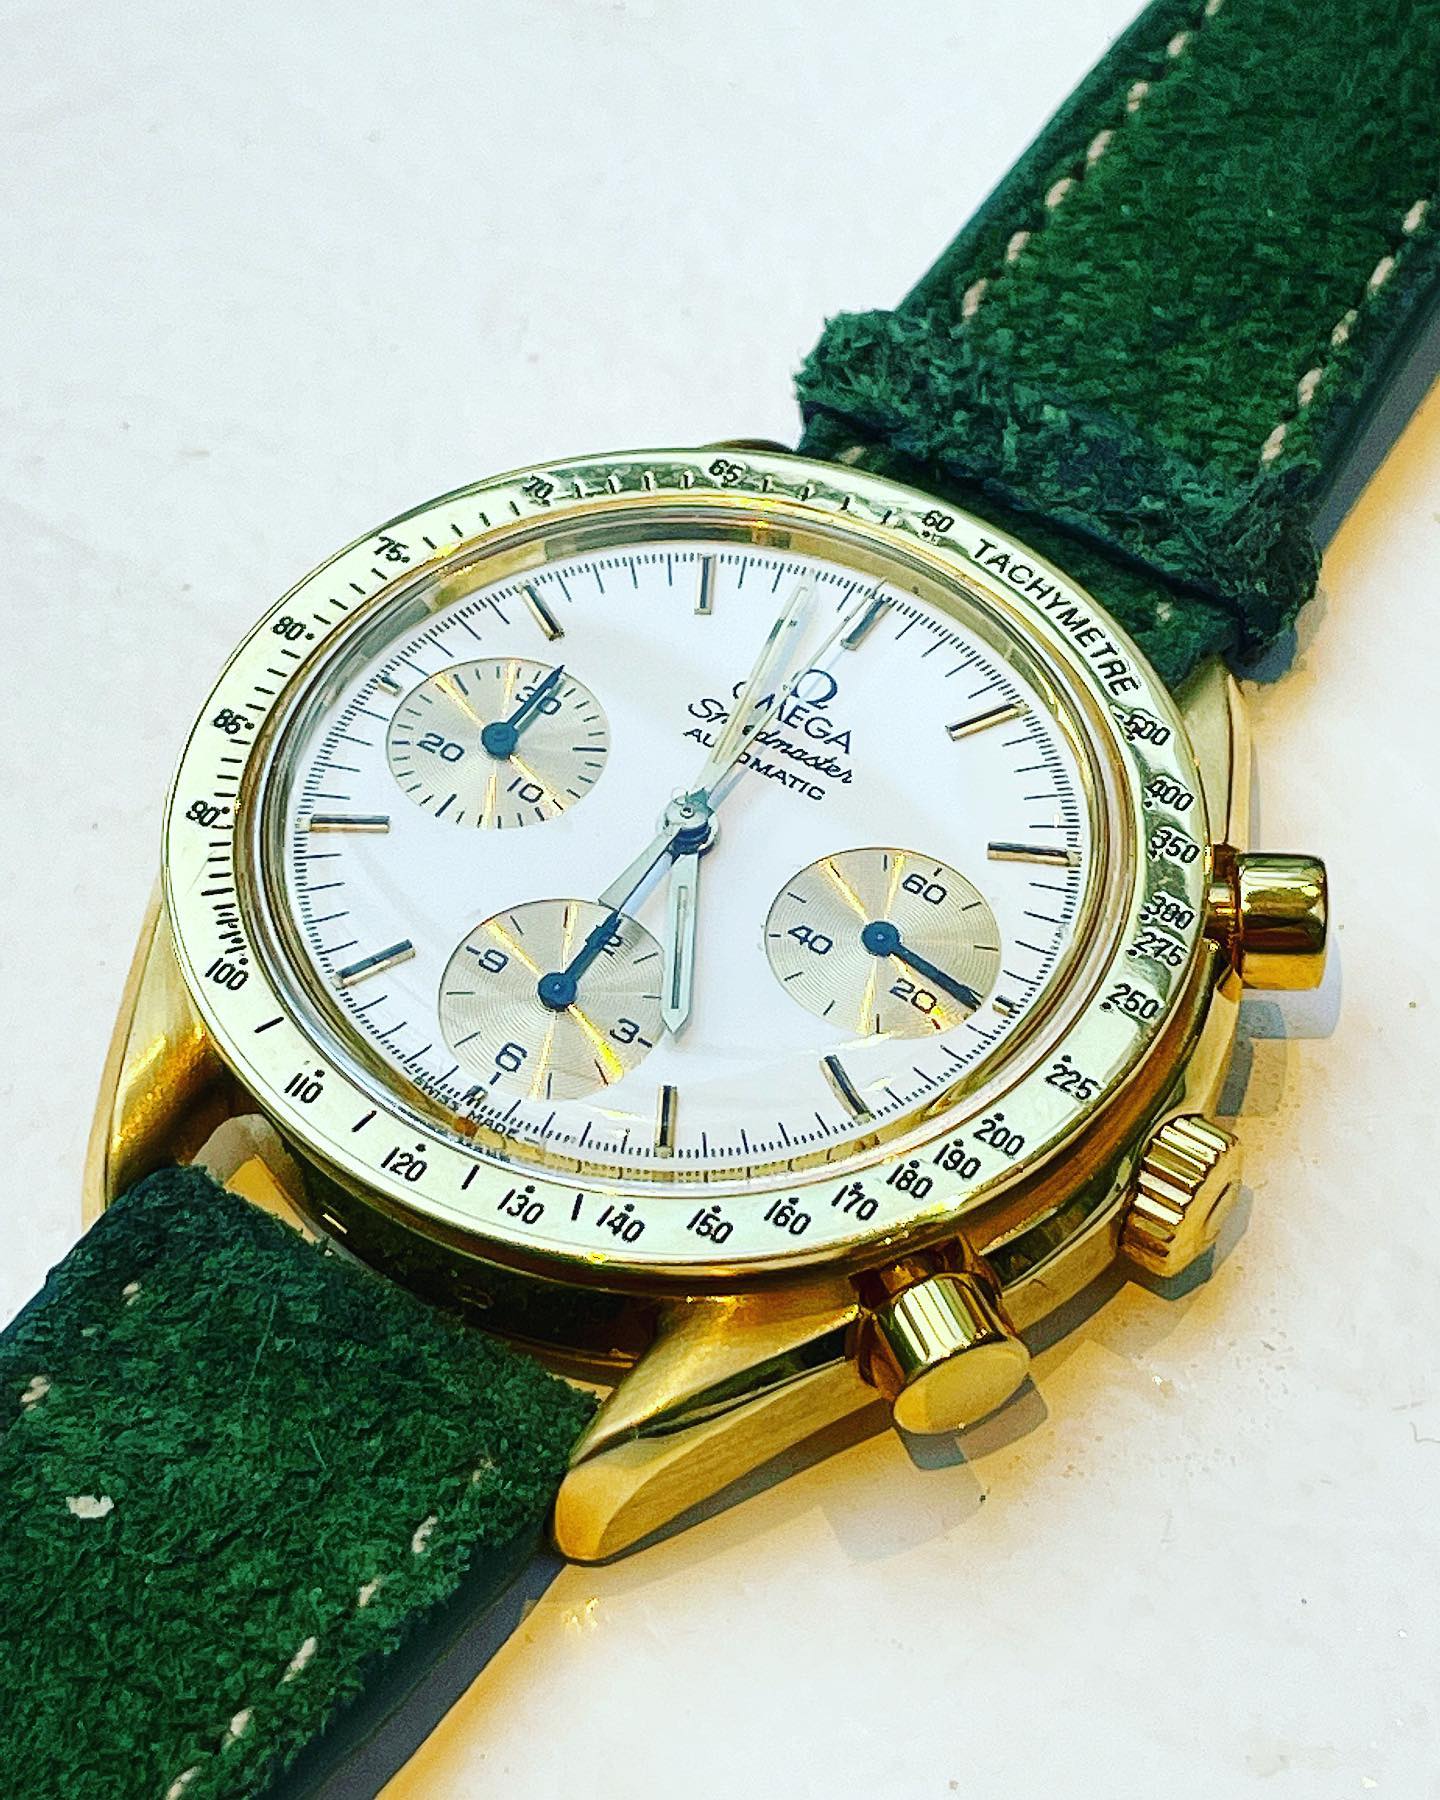 White dial with golden bezel and a black tachymètre inlay. Gold minute counter and chronograph subdials.Golden applied indices. Gold minute, hour and chronograph seconds hand. Subdials with black hands. Omega Speedmaster Reduced Unclear